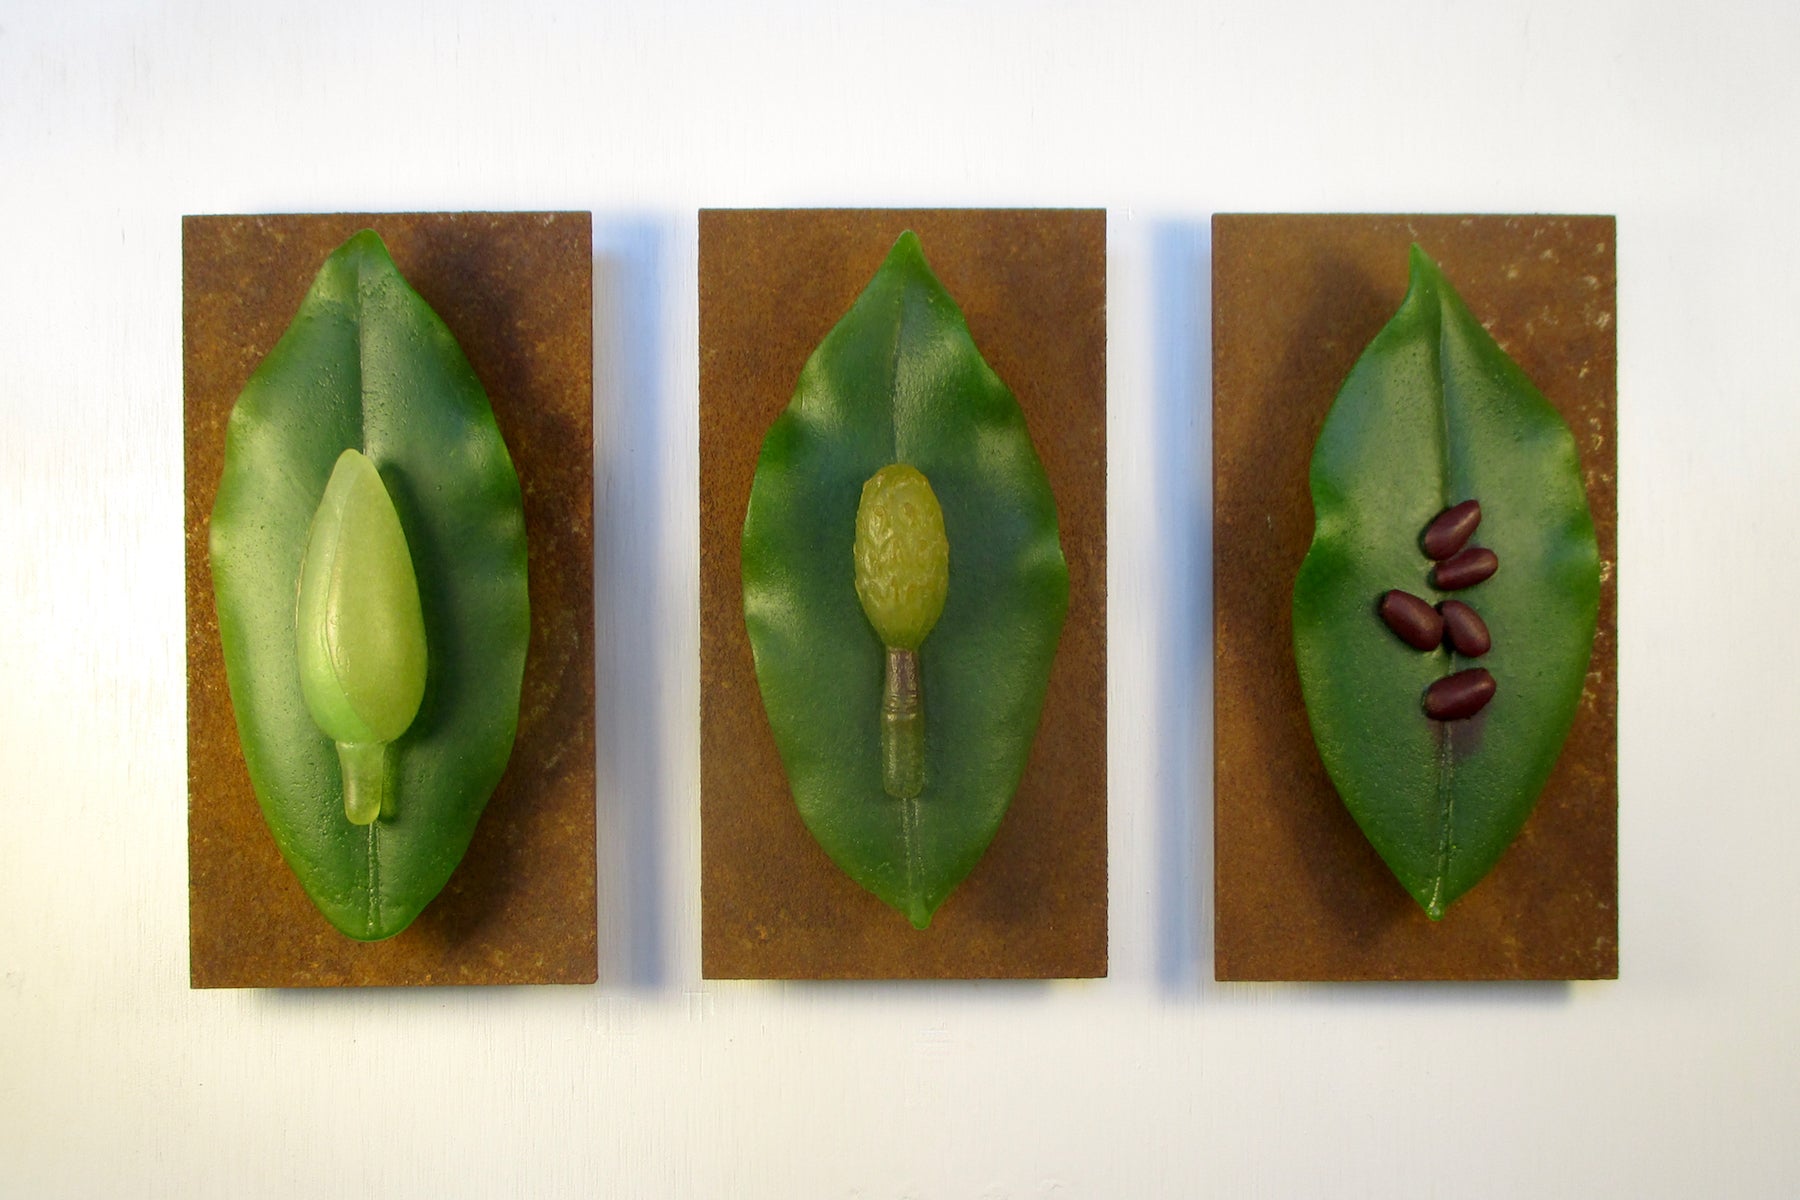 Particles-Ellen Abbott: Magnolia Leaves with Flower Bud, Nascent Seed Pod, and Seeds